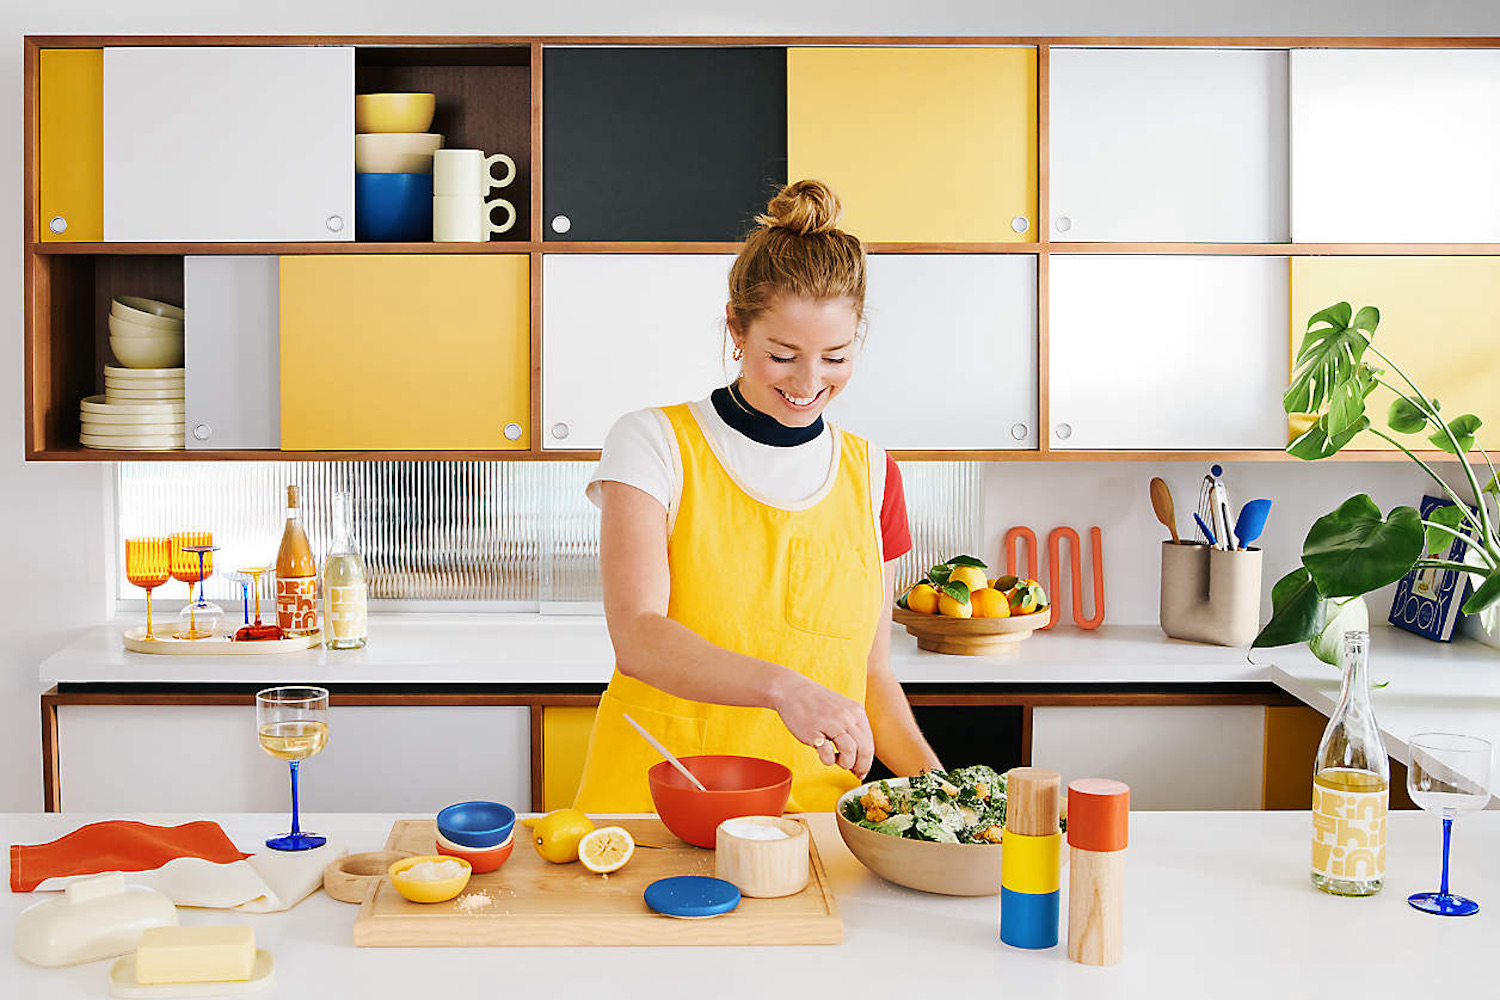 a photo of Molly Baz for Crate and Barrel in a kitchen